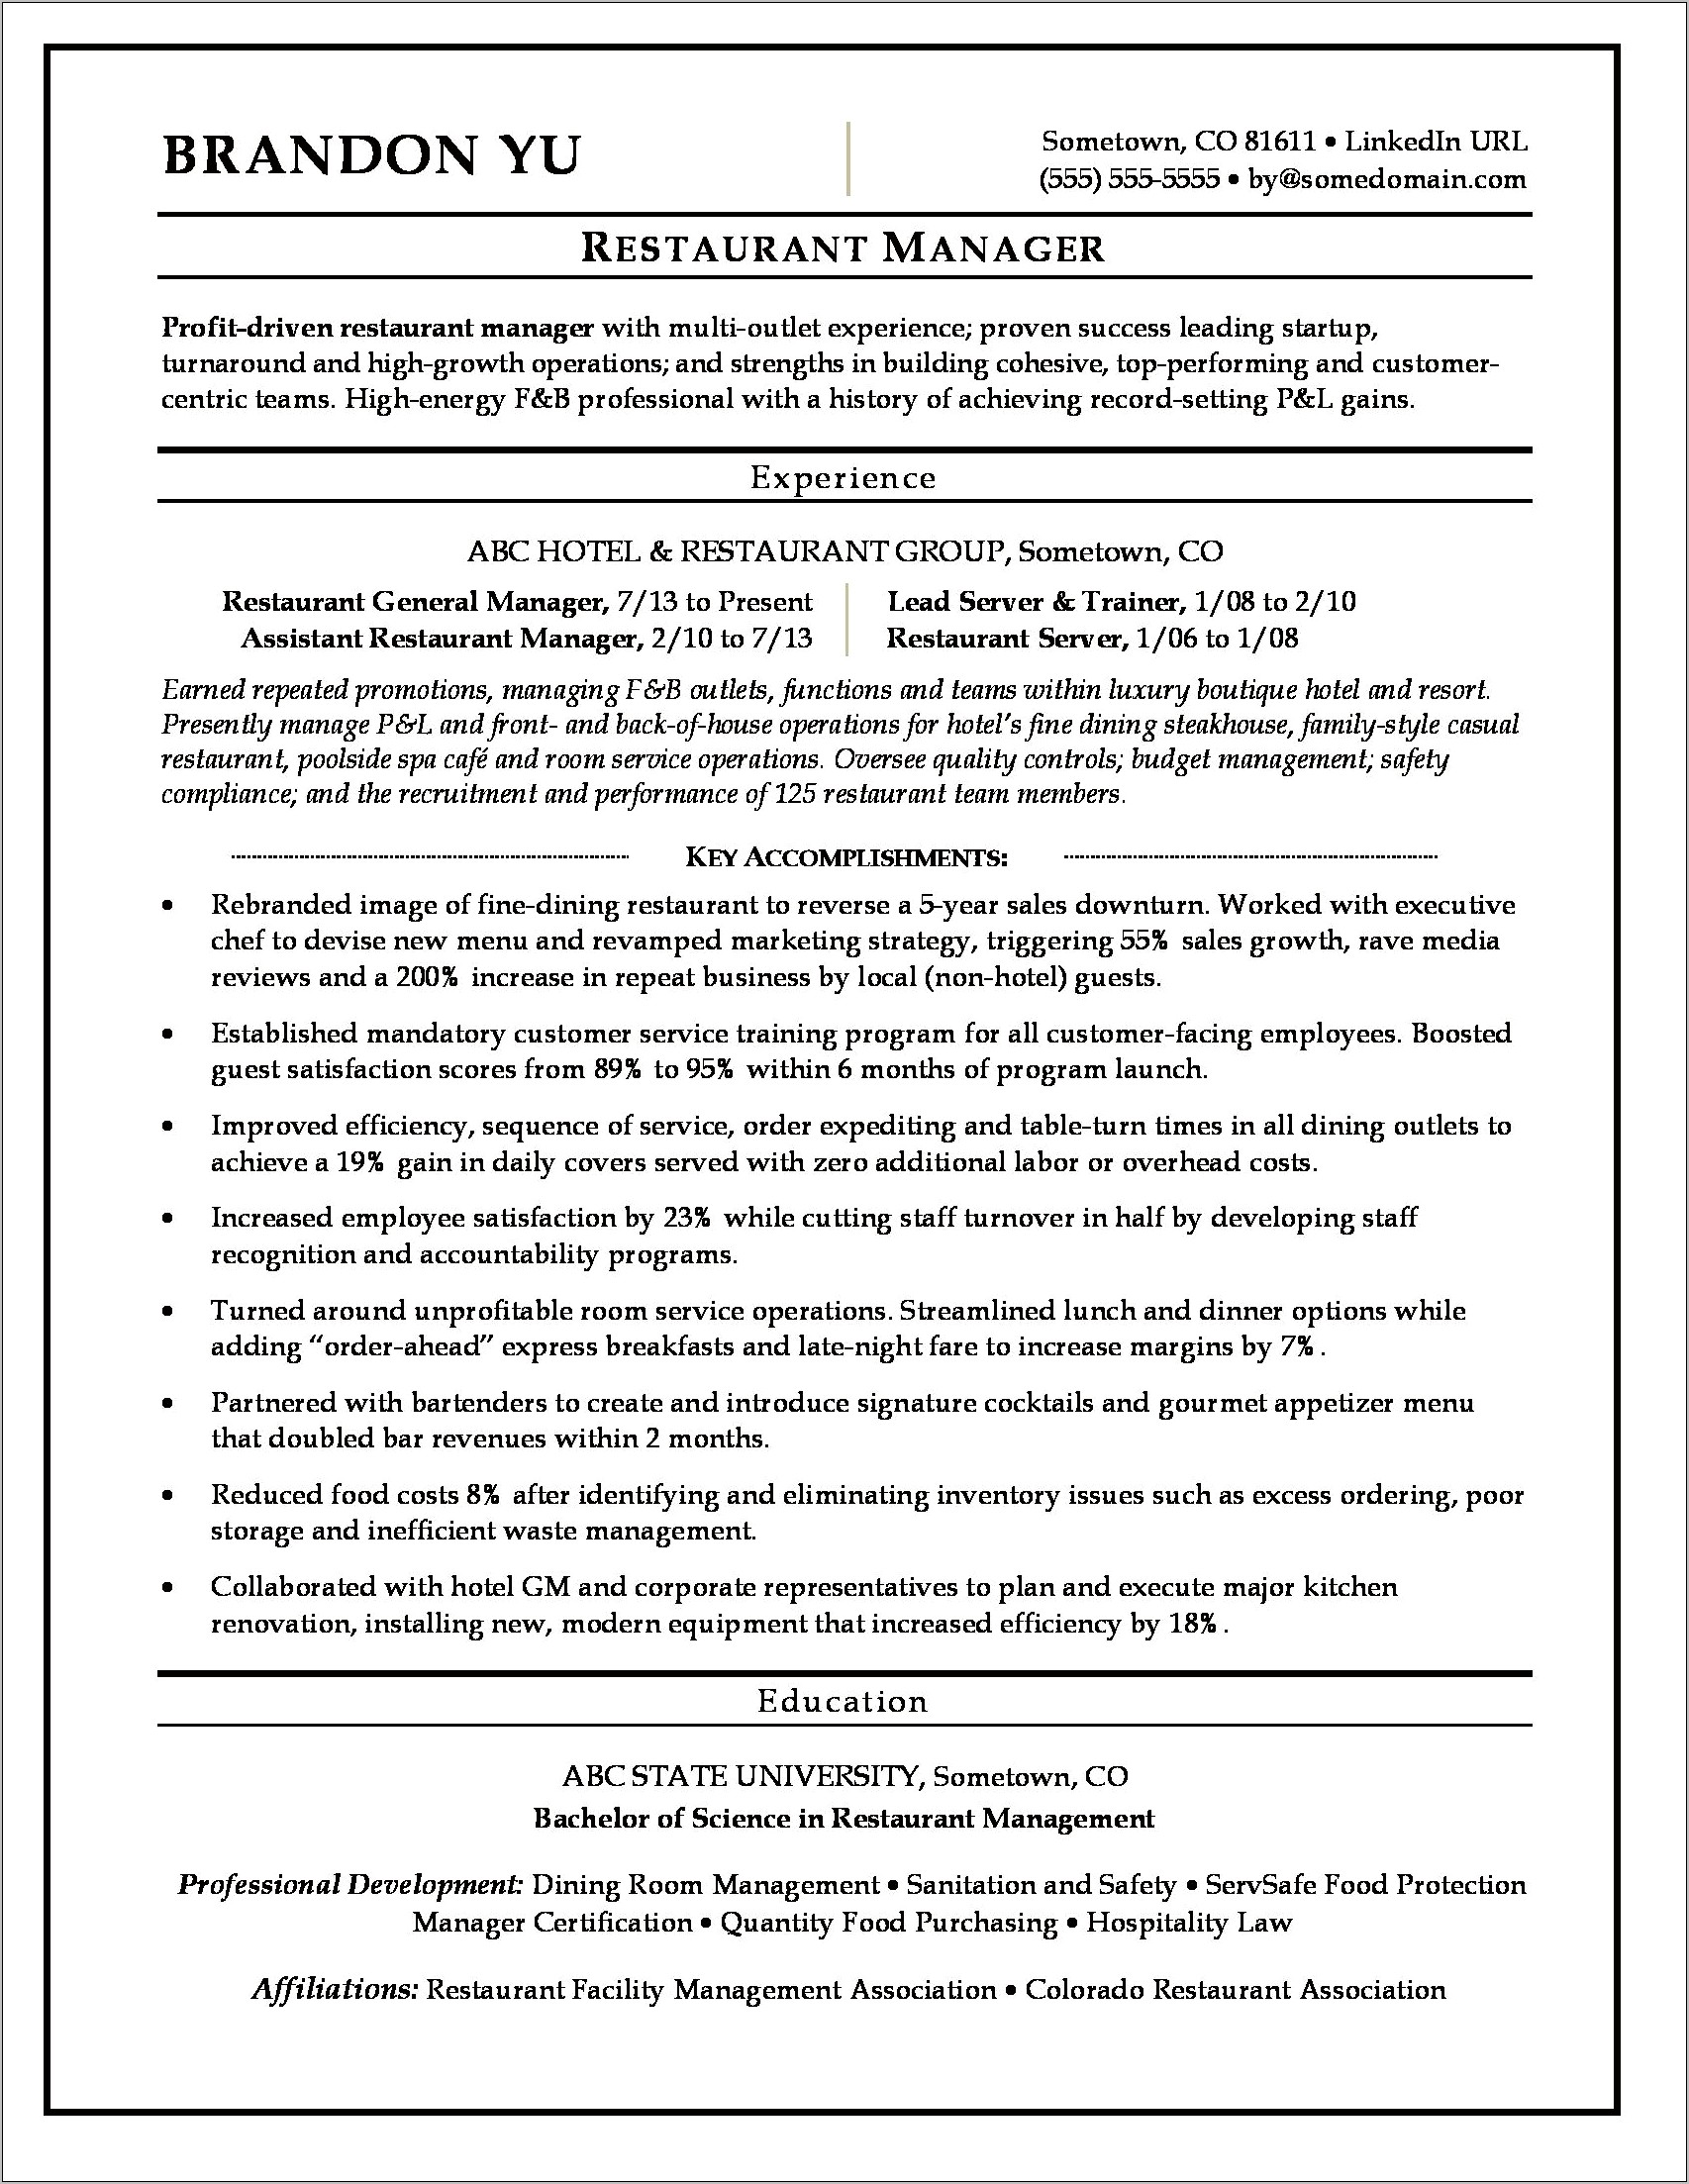 Assitant Restraunt Manager Work Experience Resume